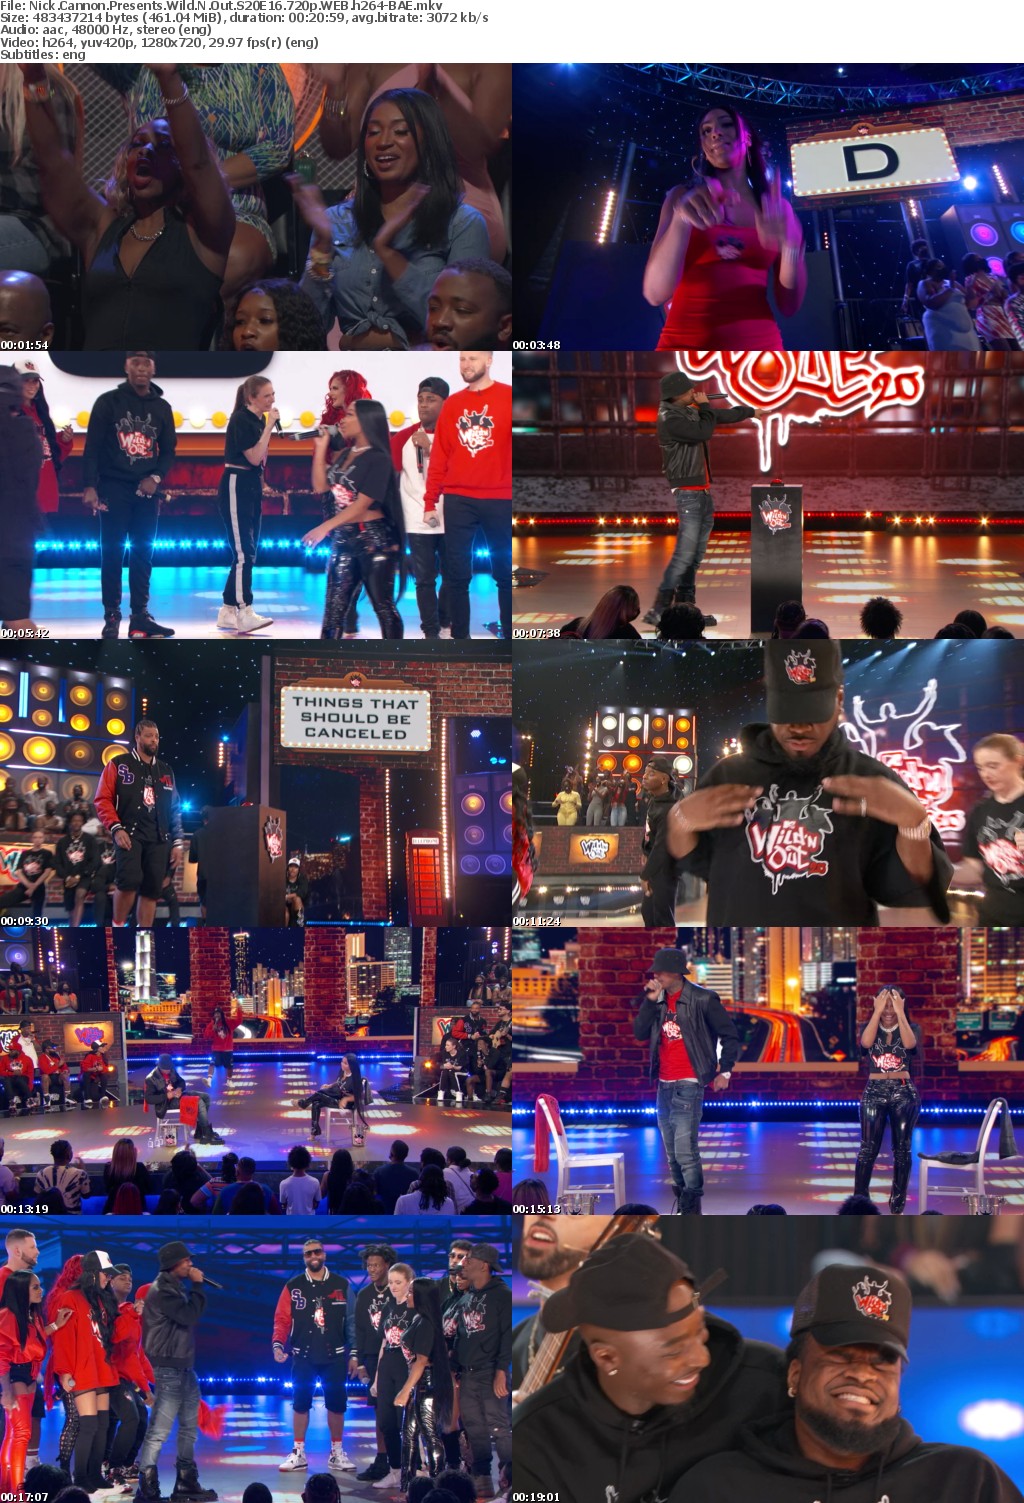 Nick Cannon Presents Wild N Out S20E16 720p WEB h264-BAE